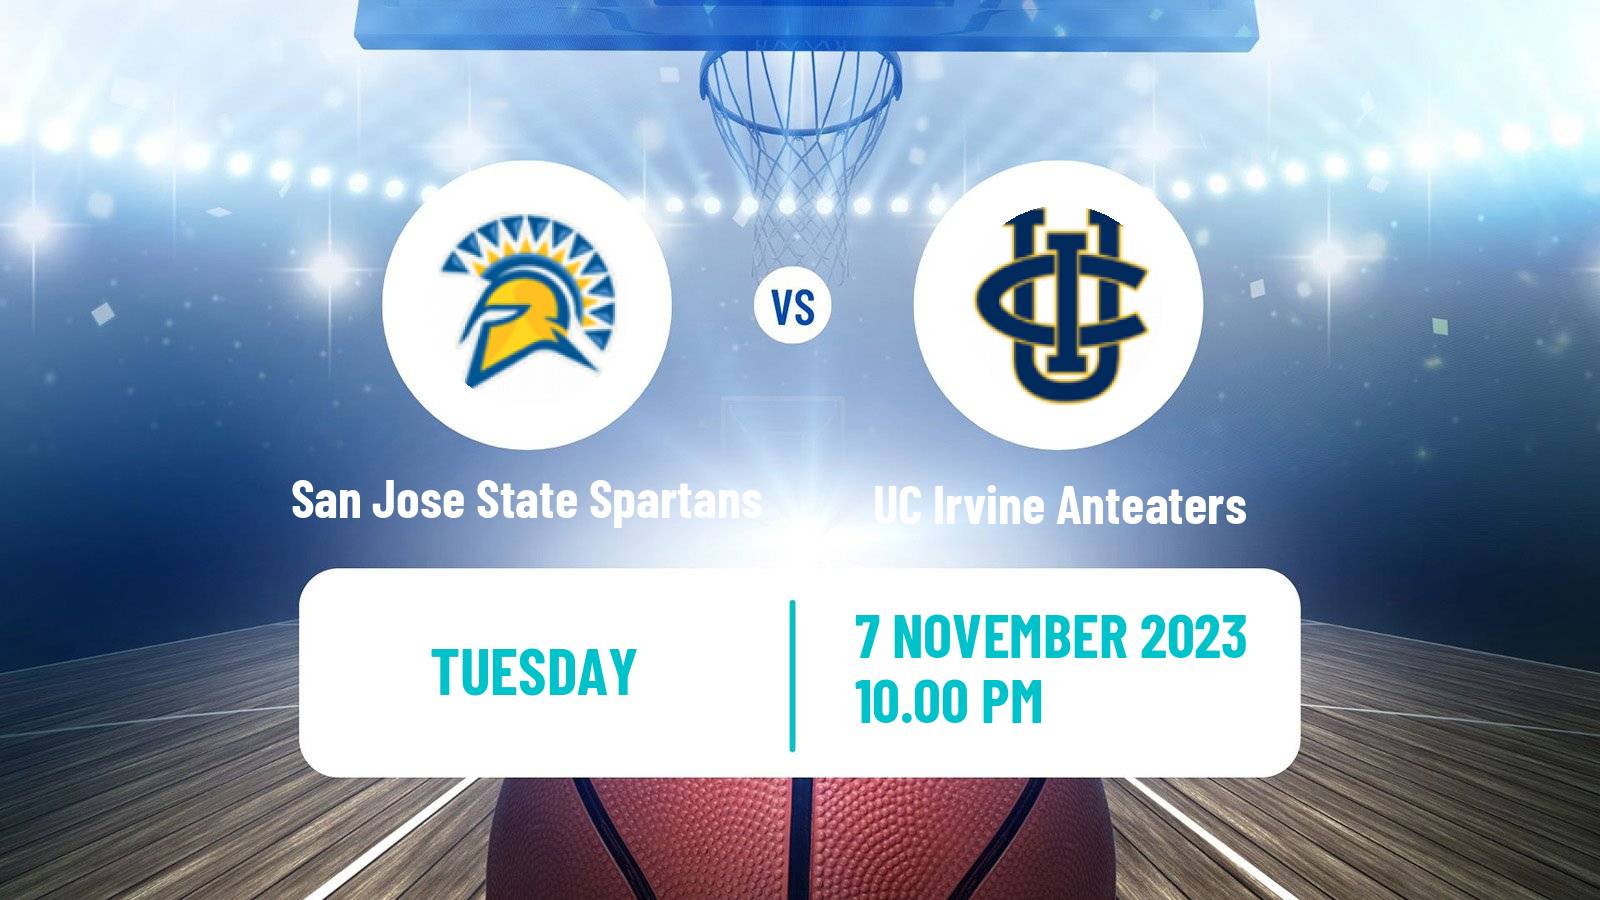 Basketball NCAA College Basketball San Jose State Spartans - UC Irvine Anteaters